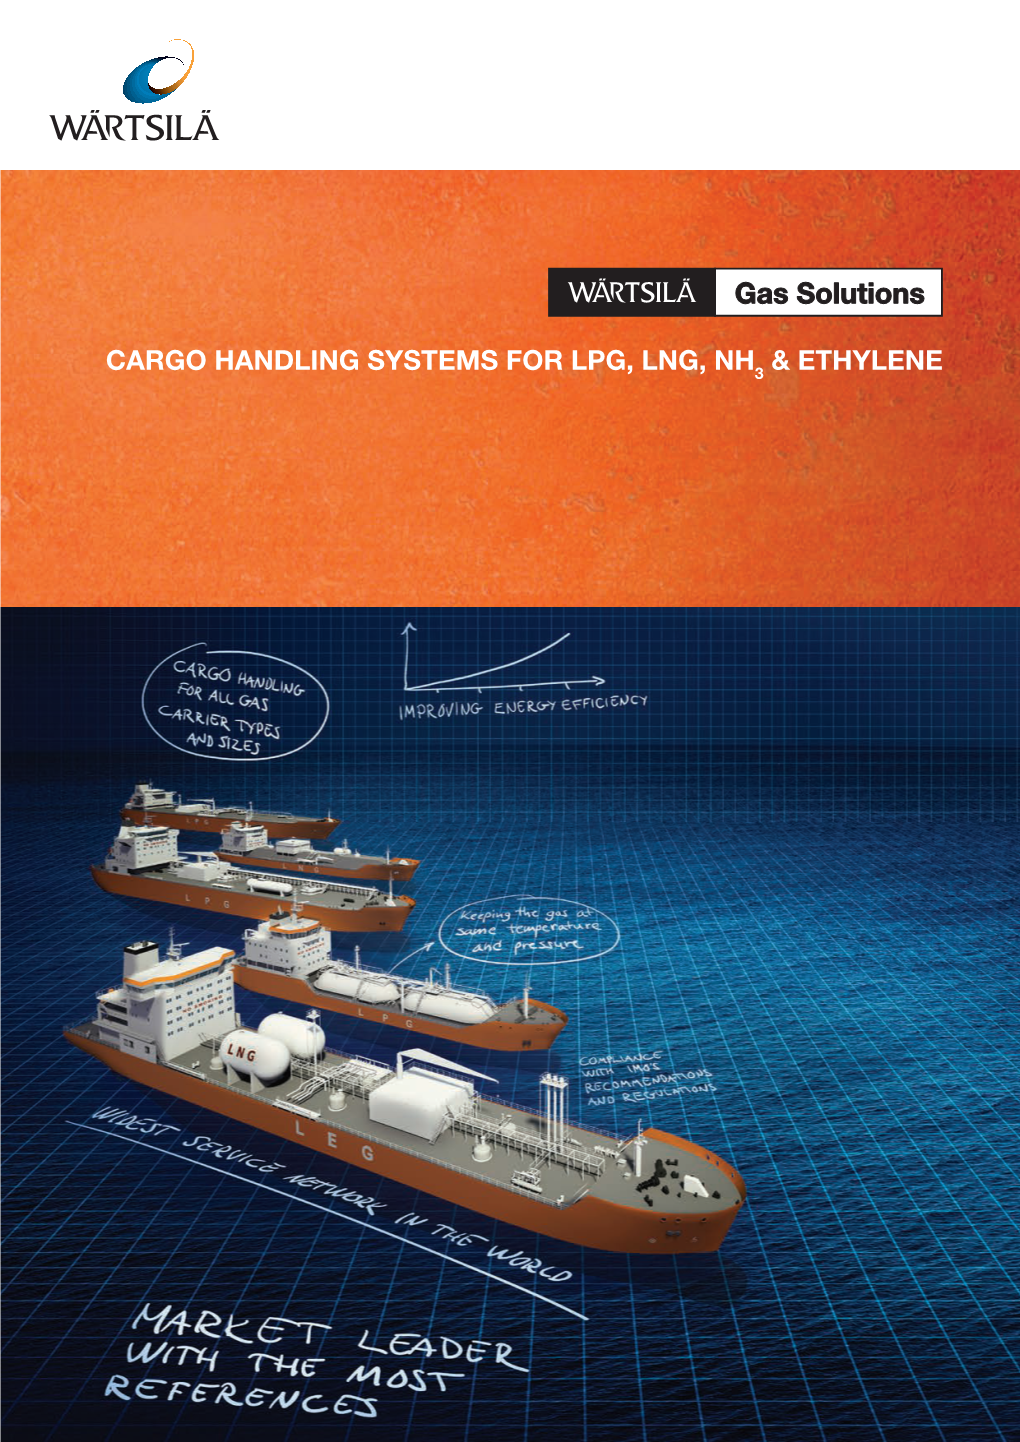 CARGO HANDLING SYSTEMS for LPG, LNG, NH3 & ETHYLENE at Wärtsilä We Strive Constantly to Do What Is Best for You